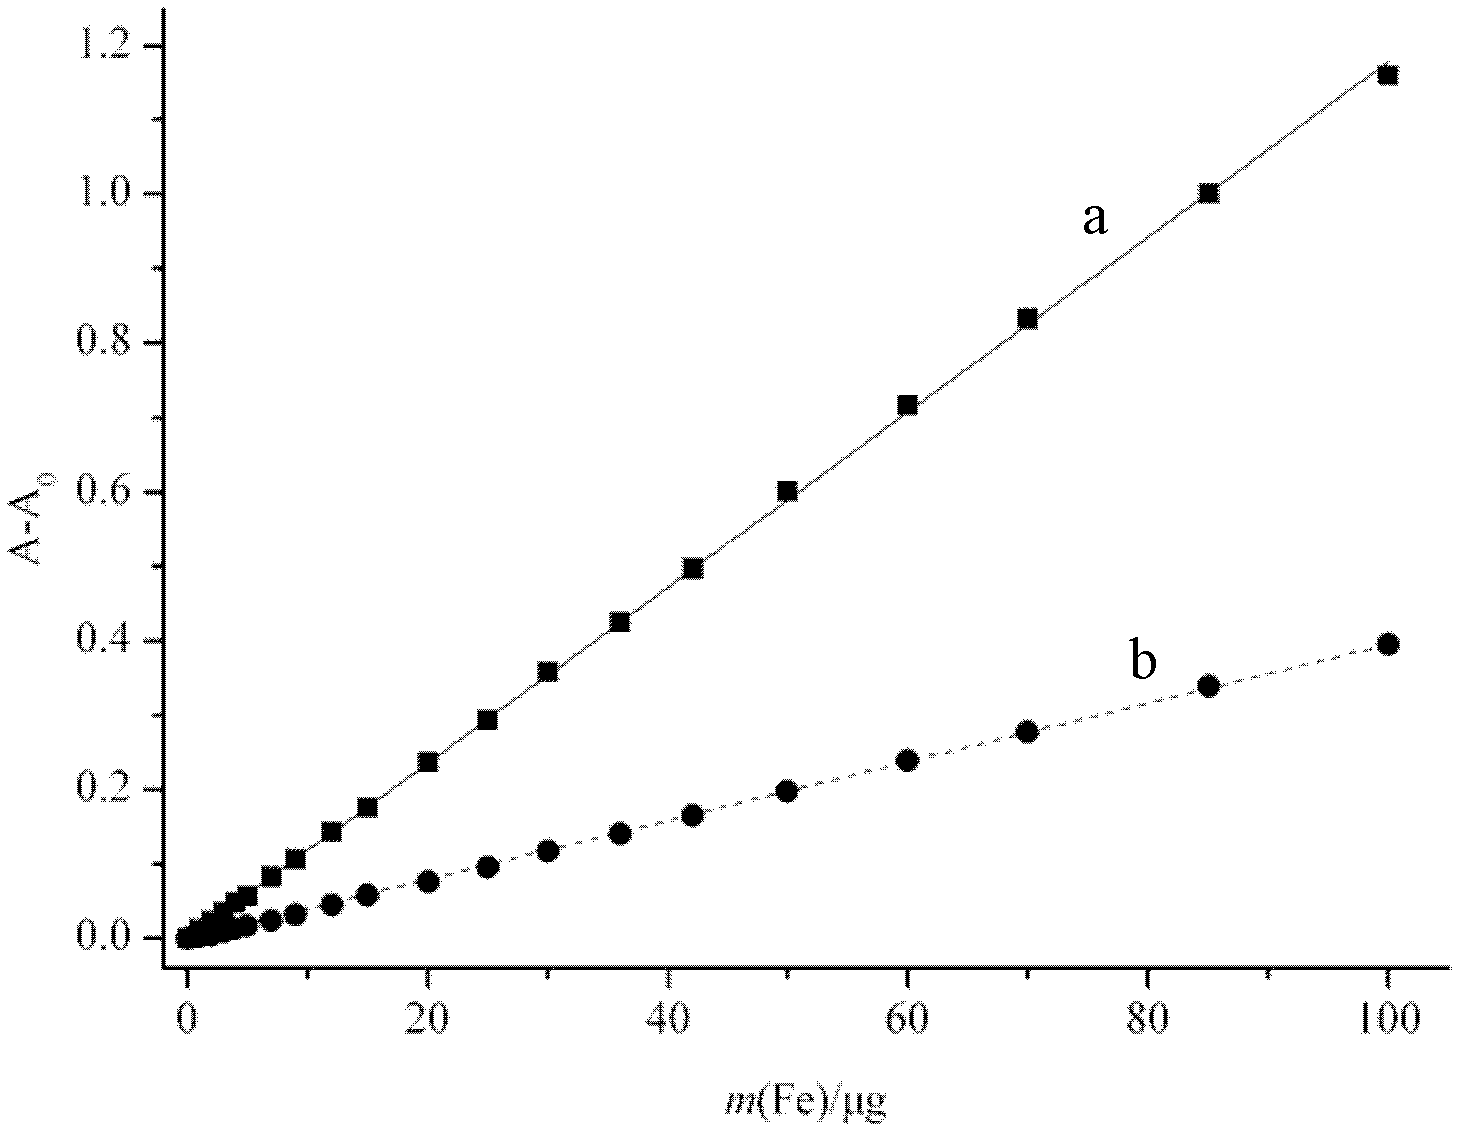 Method for measuring iron content in kaolin through using spectrophotometer